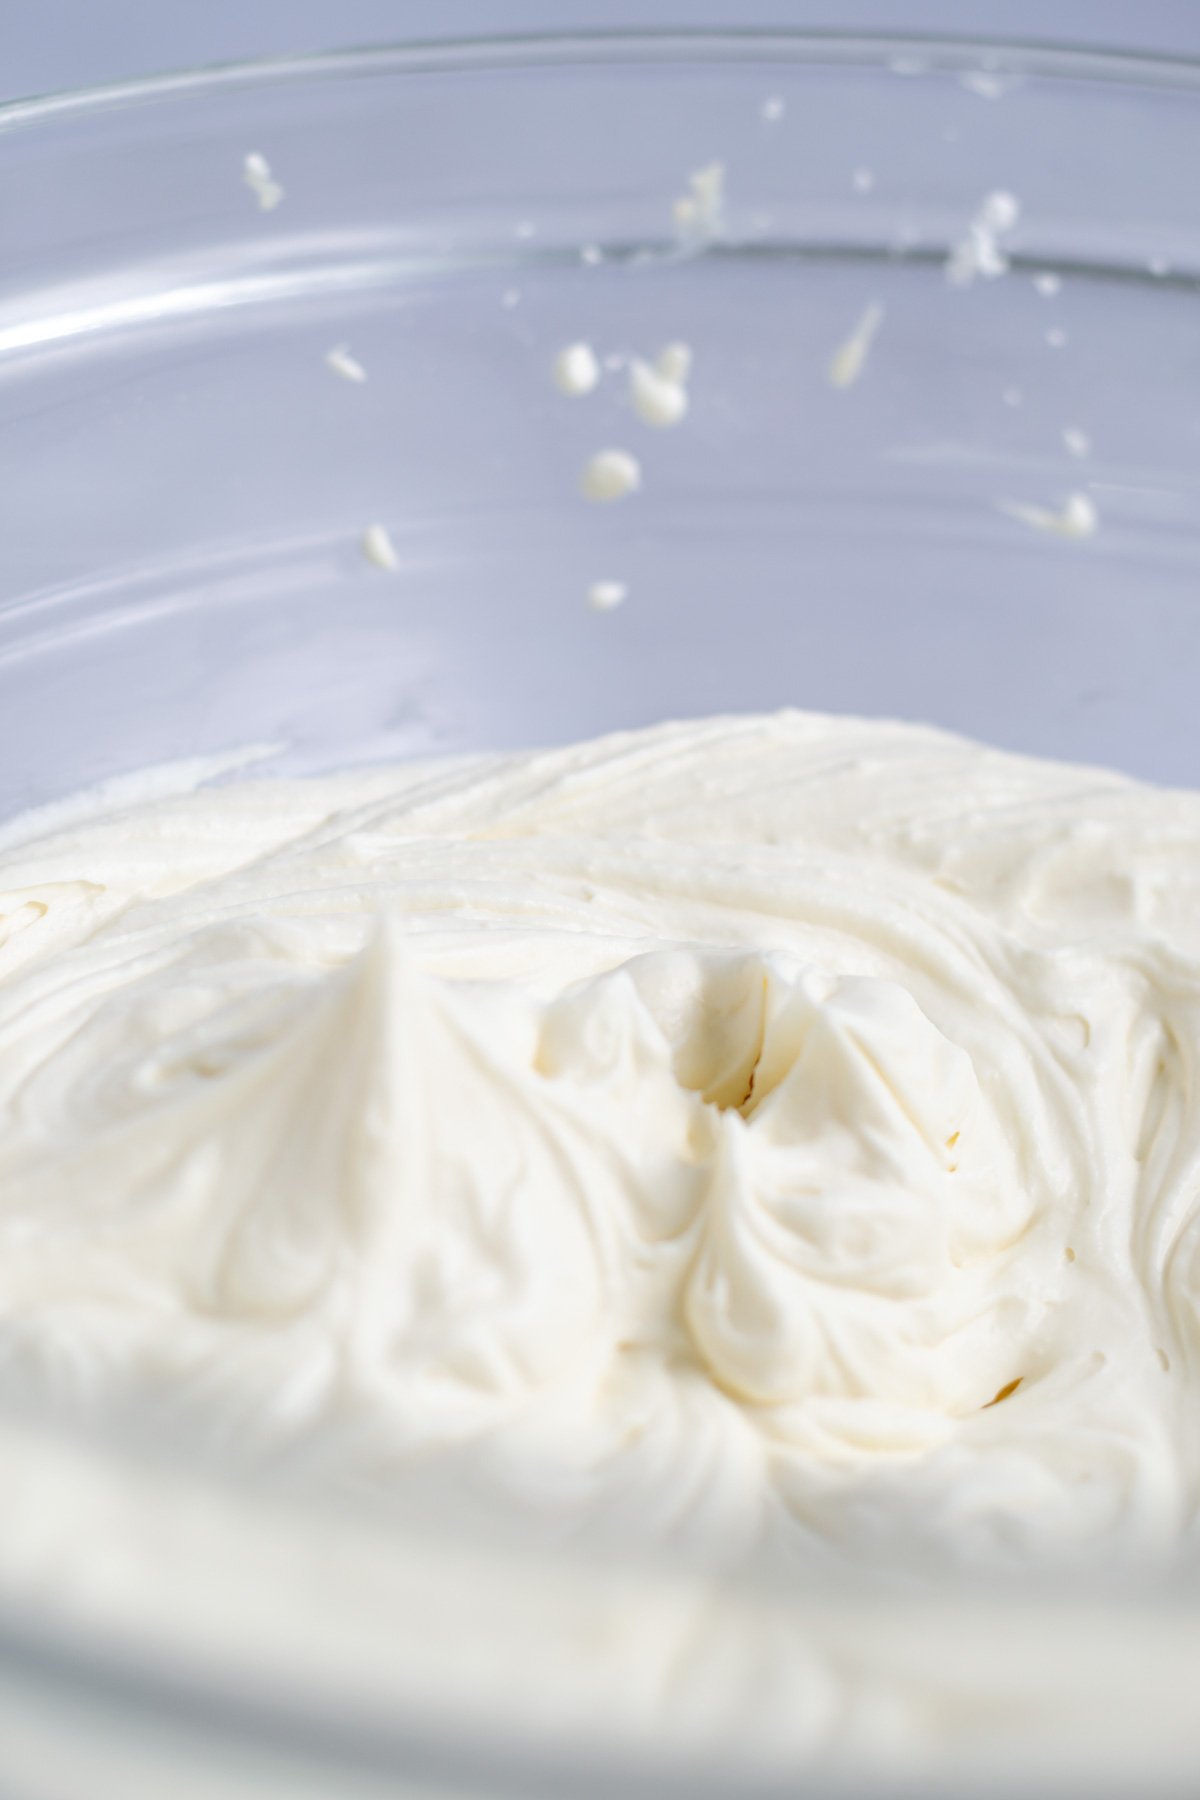 whipped cream added to confectioners' sugar and whipped to stiff peaks